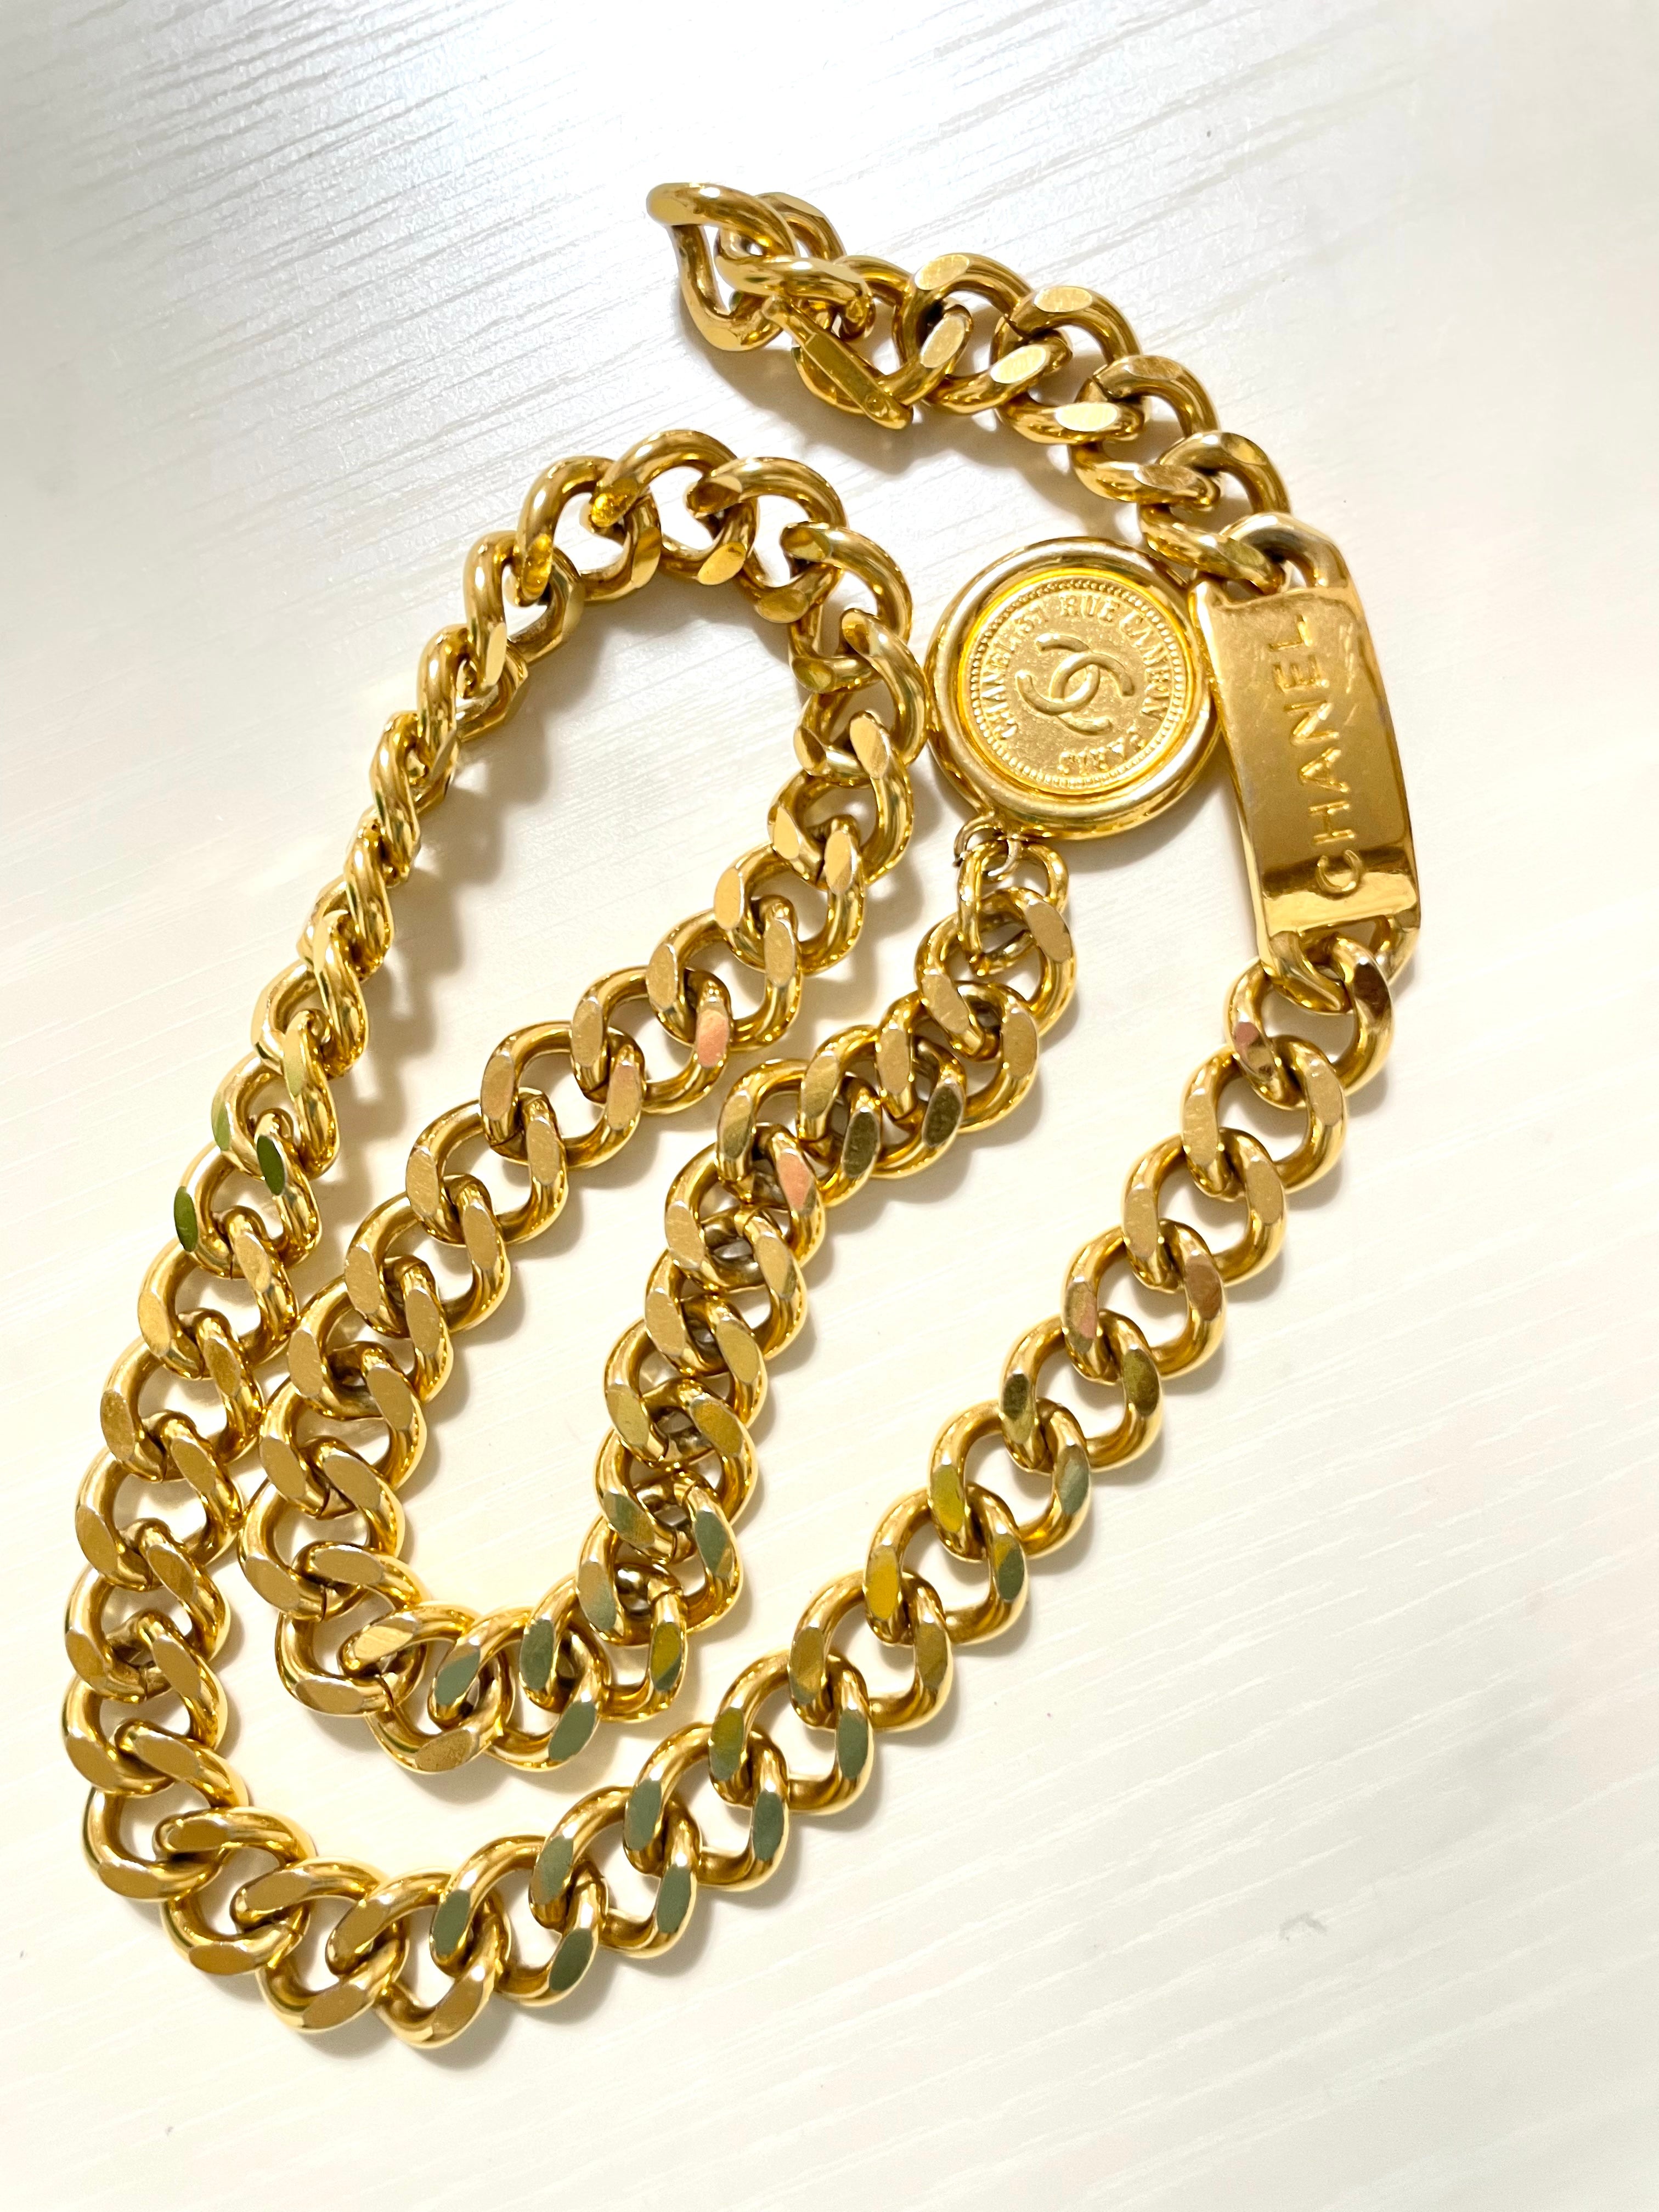 Vintage CHANEL golden thick chain belt with a CC charm and logo plate. 82cm. Classic belt. 0410244